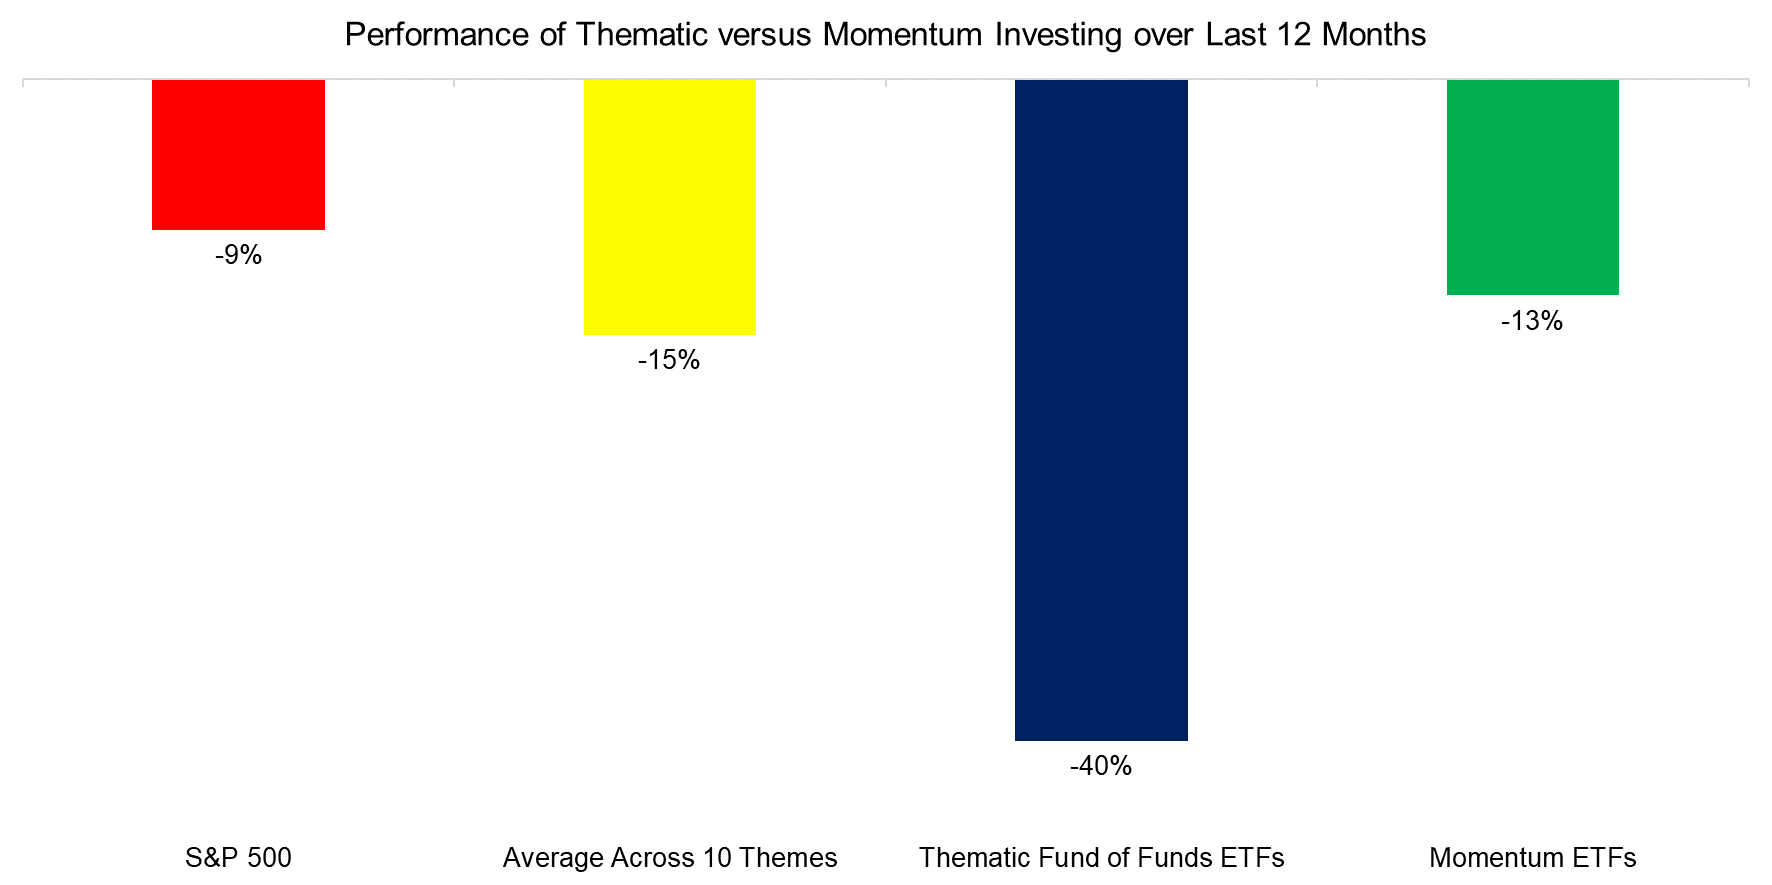 Performance of Thematic versus Momentum Investing over Last 12 Months